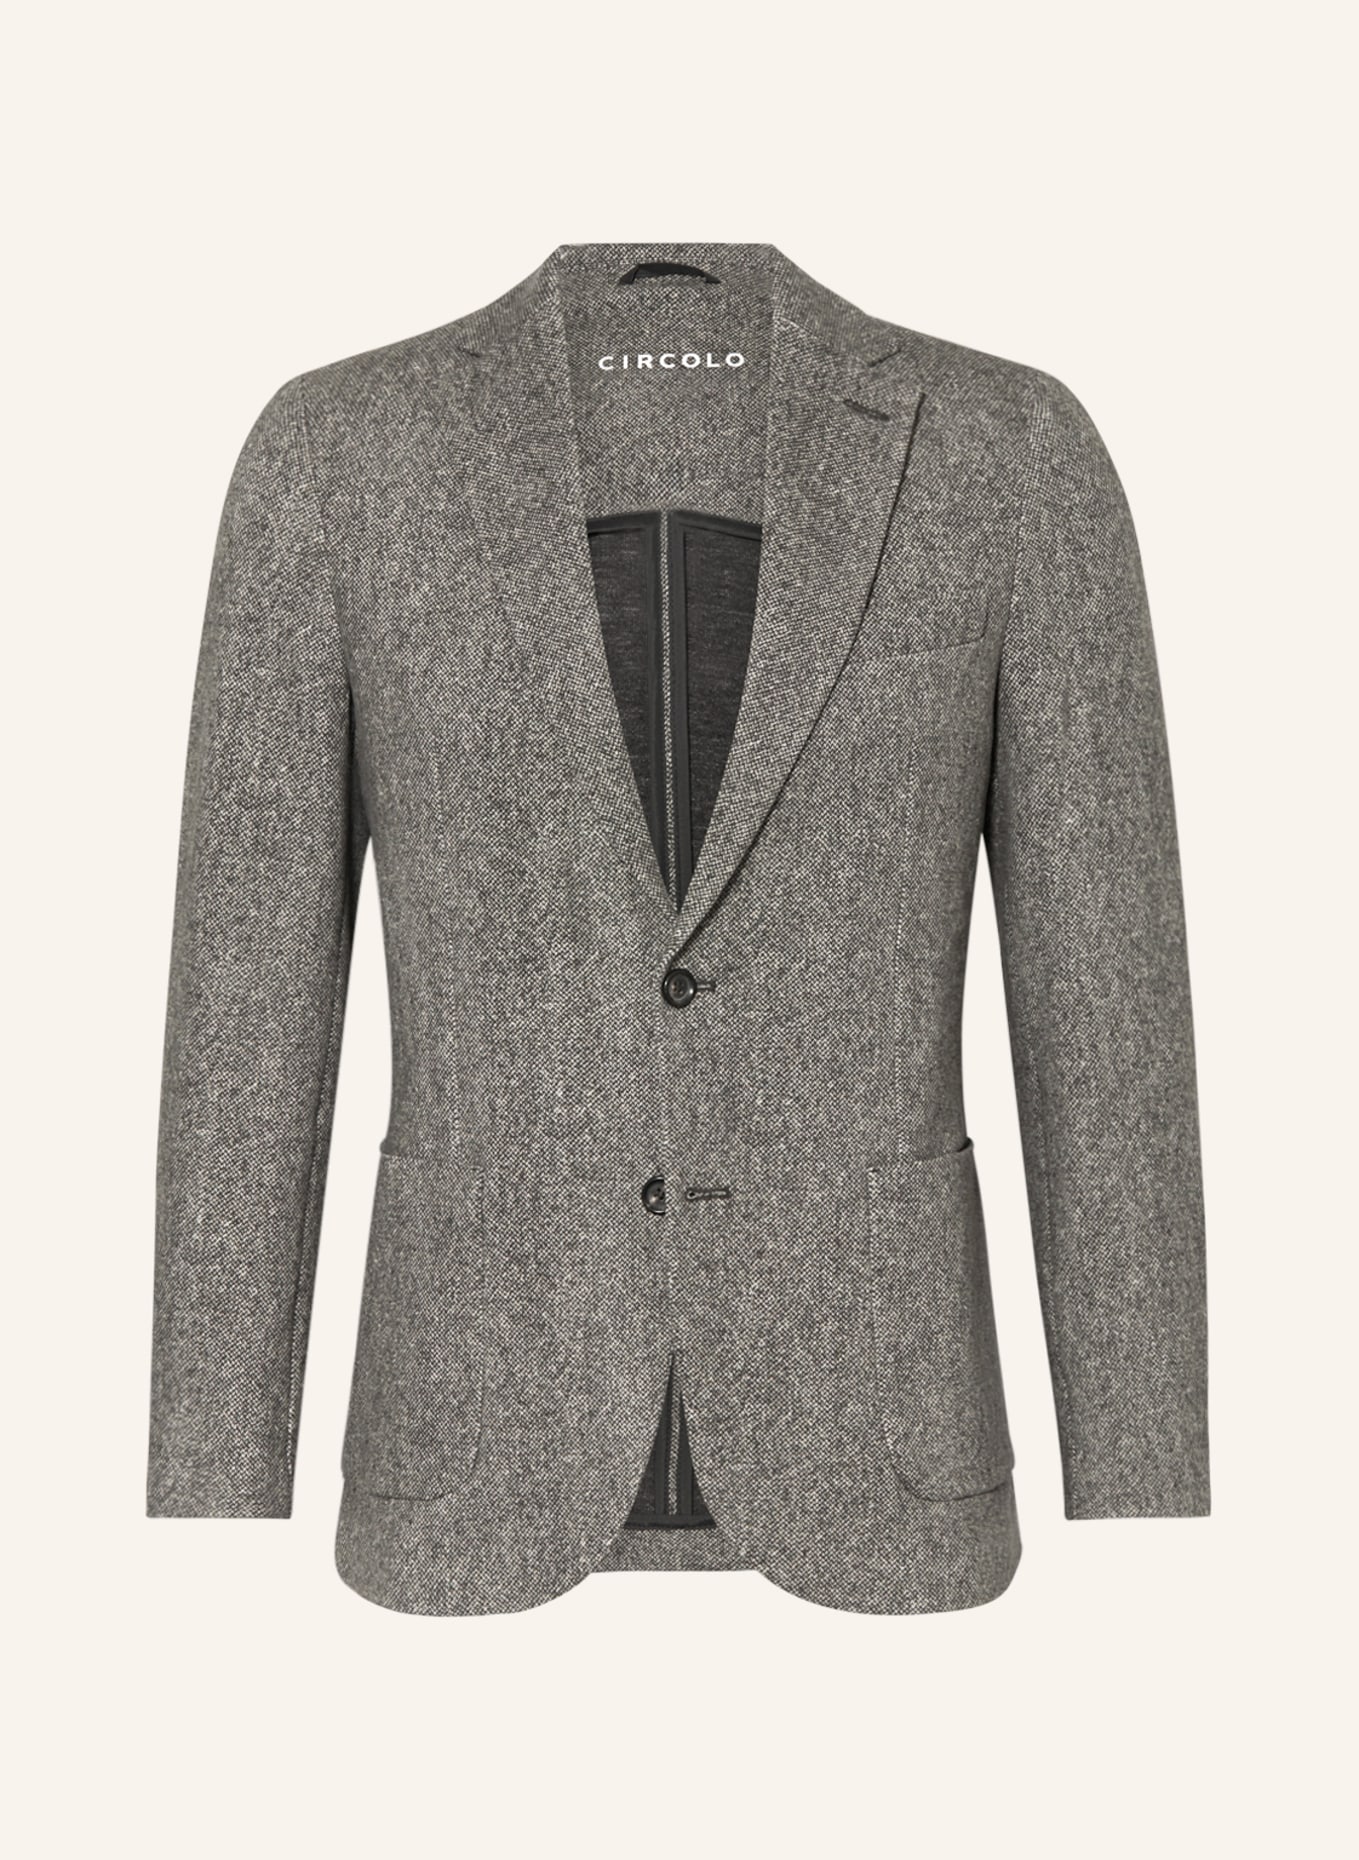 CIRCOLO 1901 Suit jacket extra slim fit made of jersey, Color: CARBO CARBONE-L (Image 1)